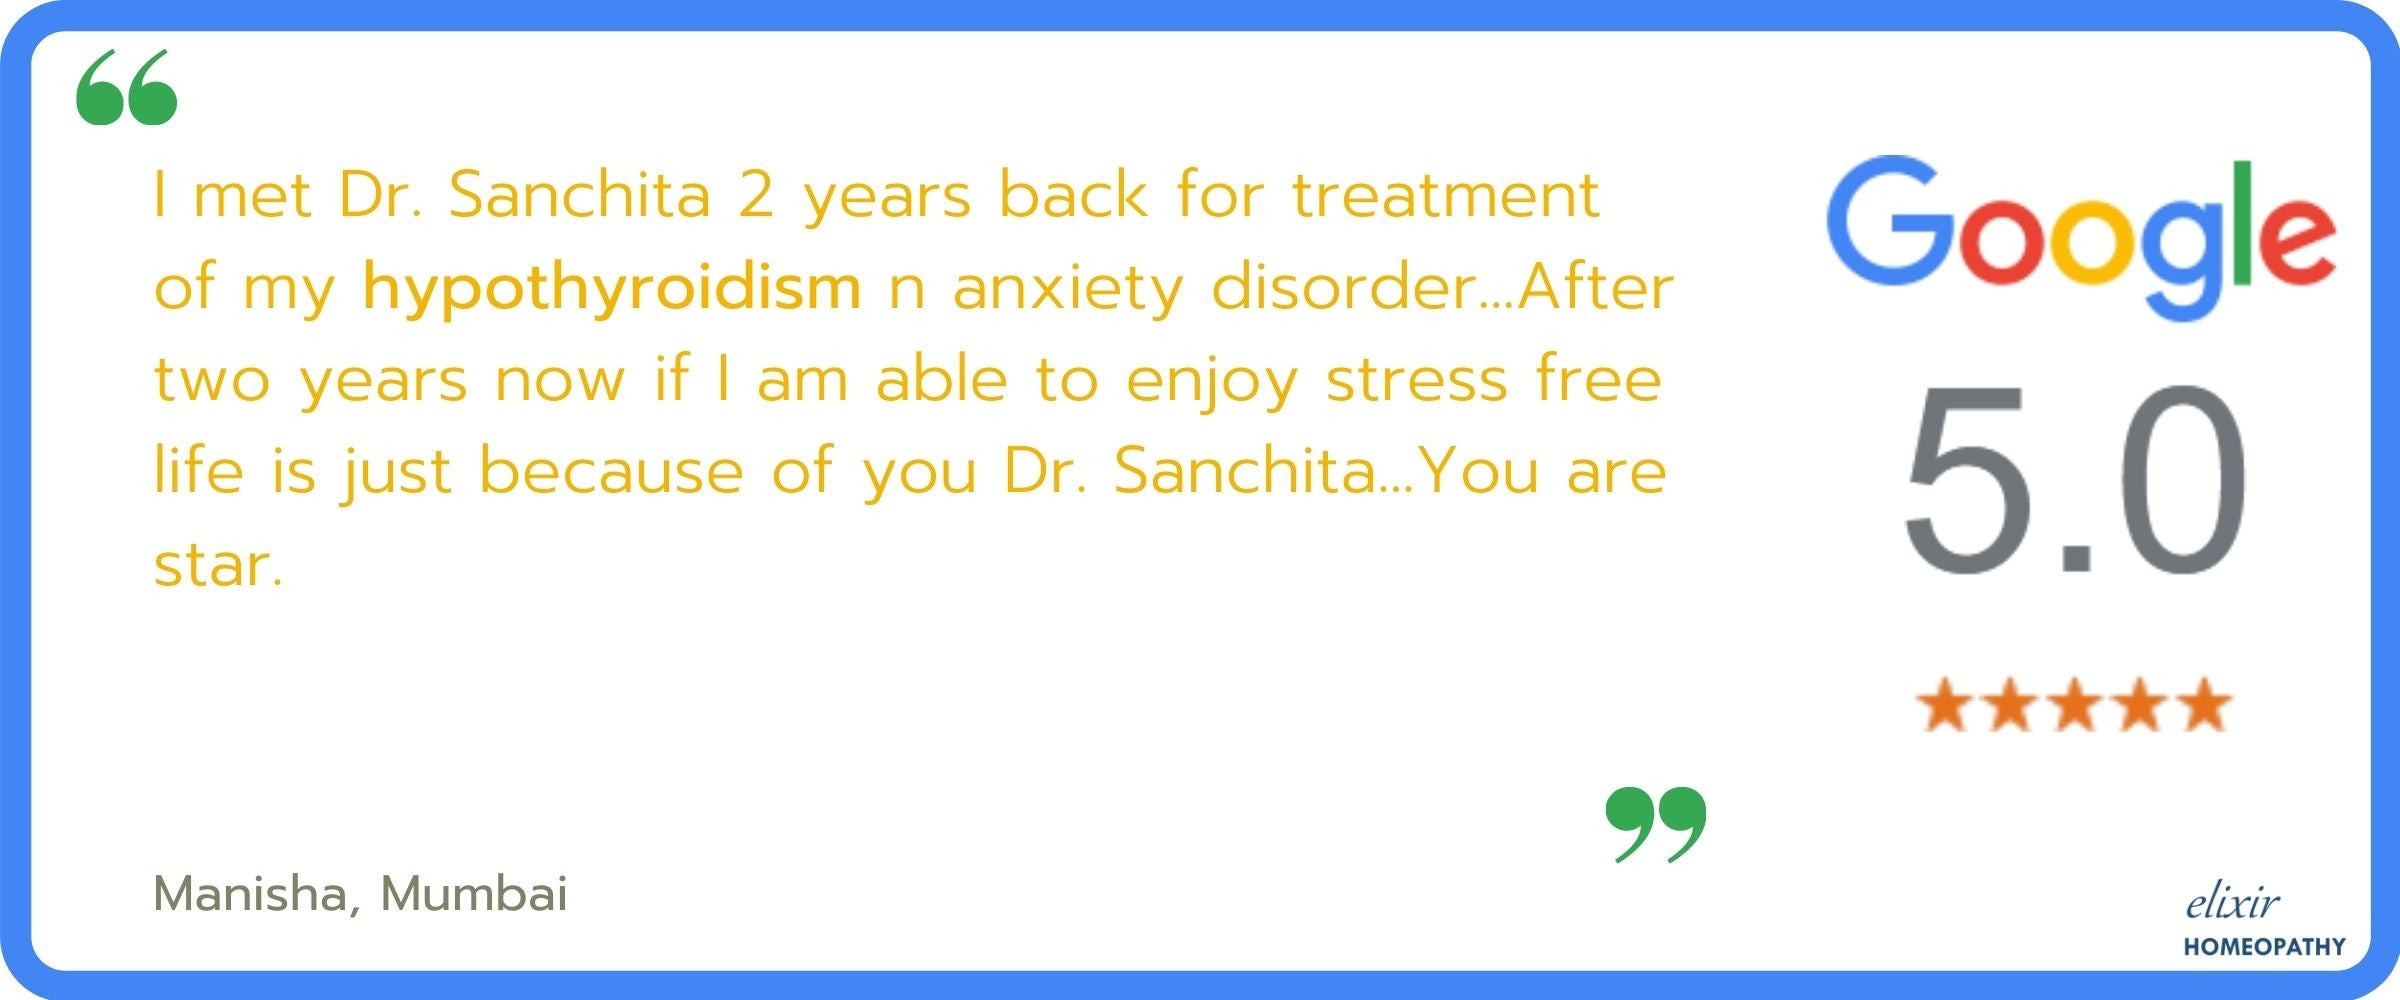 5-star ratings and reviews given by Manish (from Mumbai), to Dr. Sanchita Dharne of Elixir Homeopathy, for successful homeopathic treatment of her hypothyroidism.